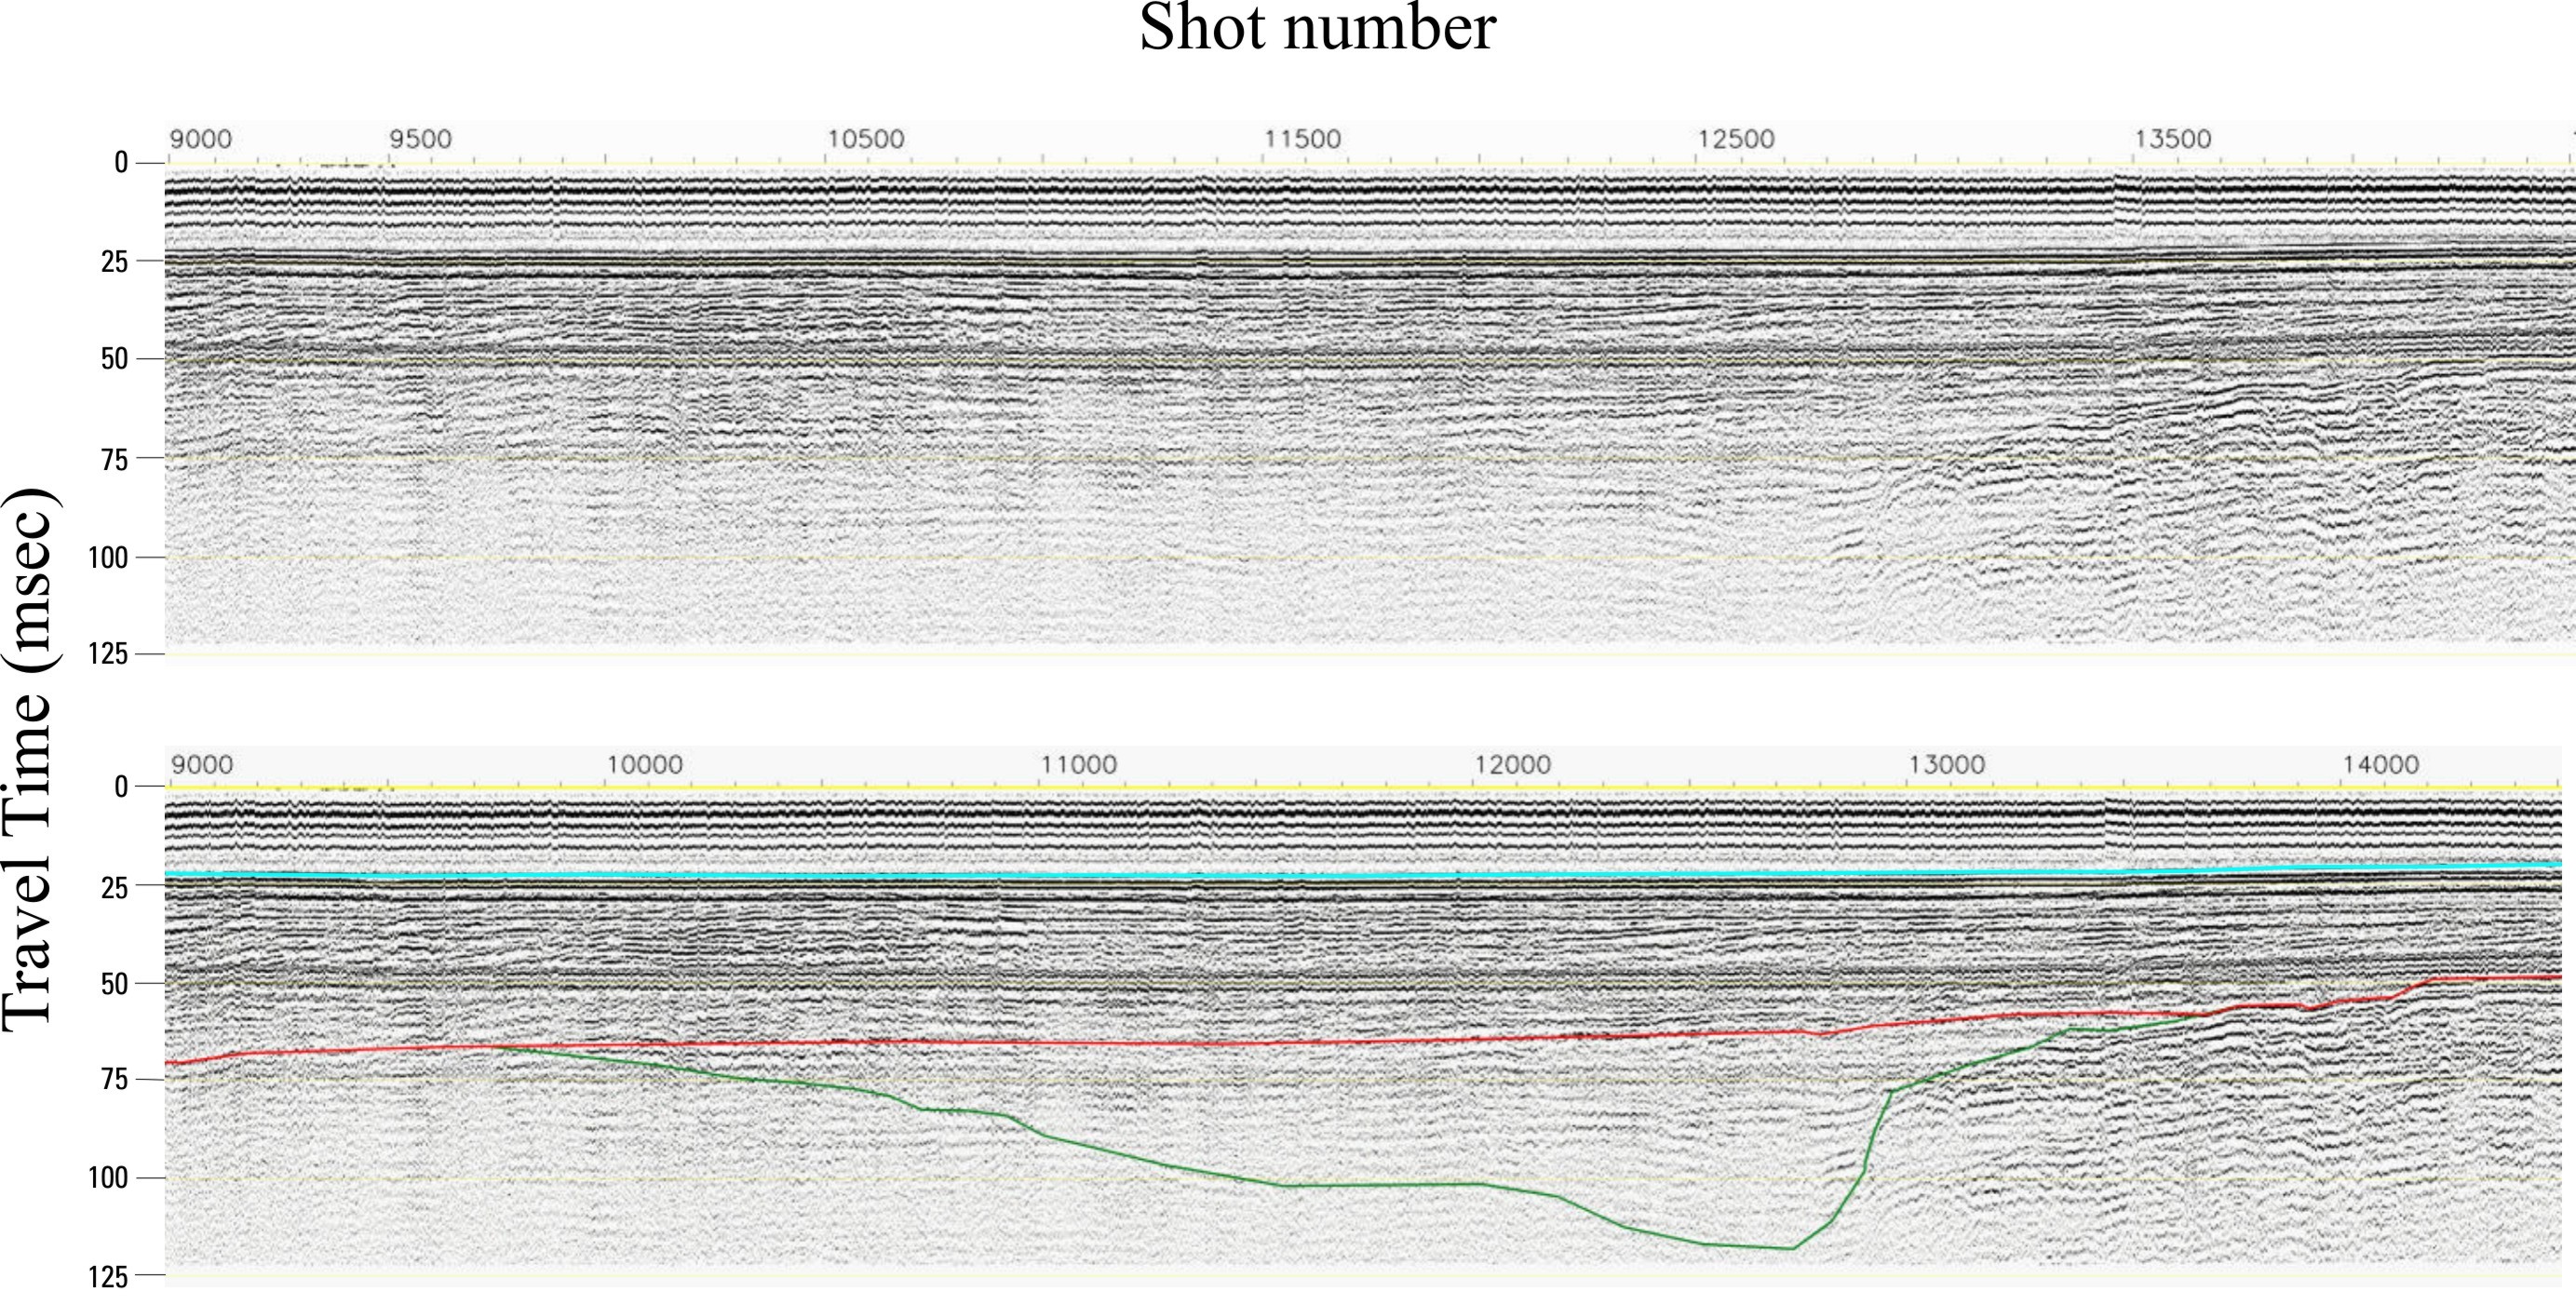 Figure 4. Uninterpreted and interpreted seismic profile on the continental shelf off the mouth of the Columbia River showing the three surfaces identified for this study.